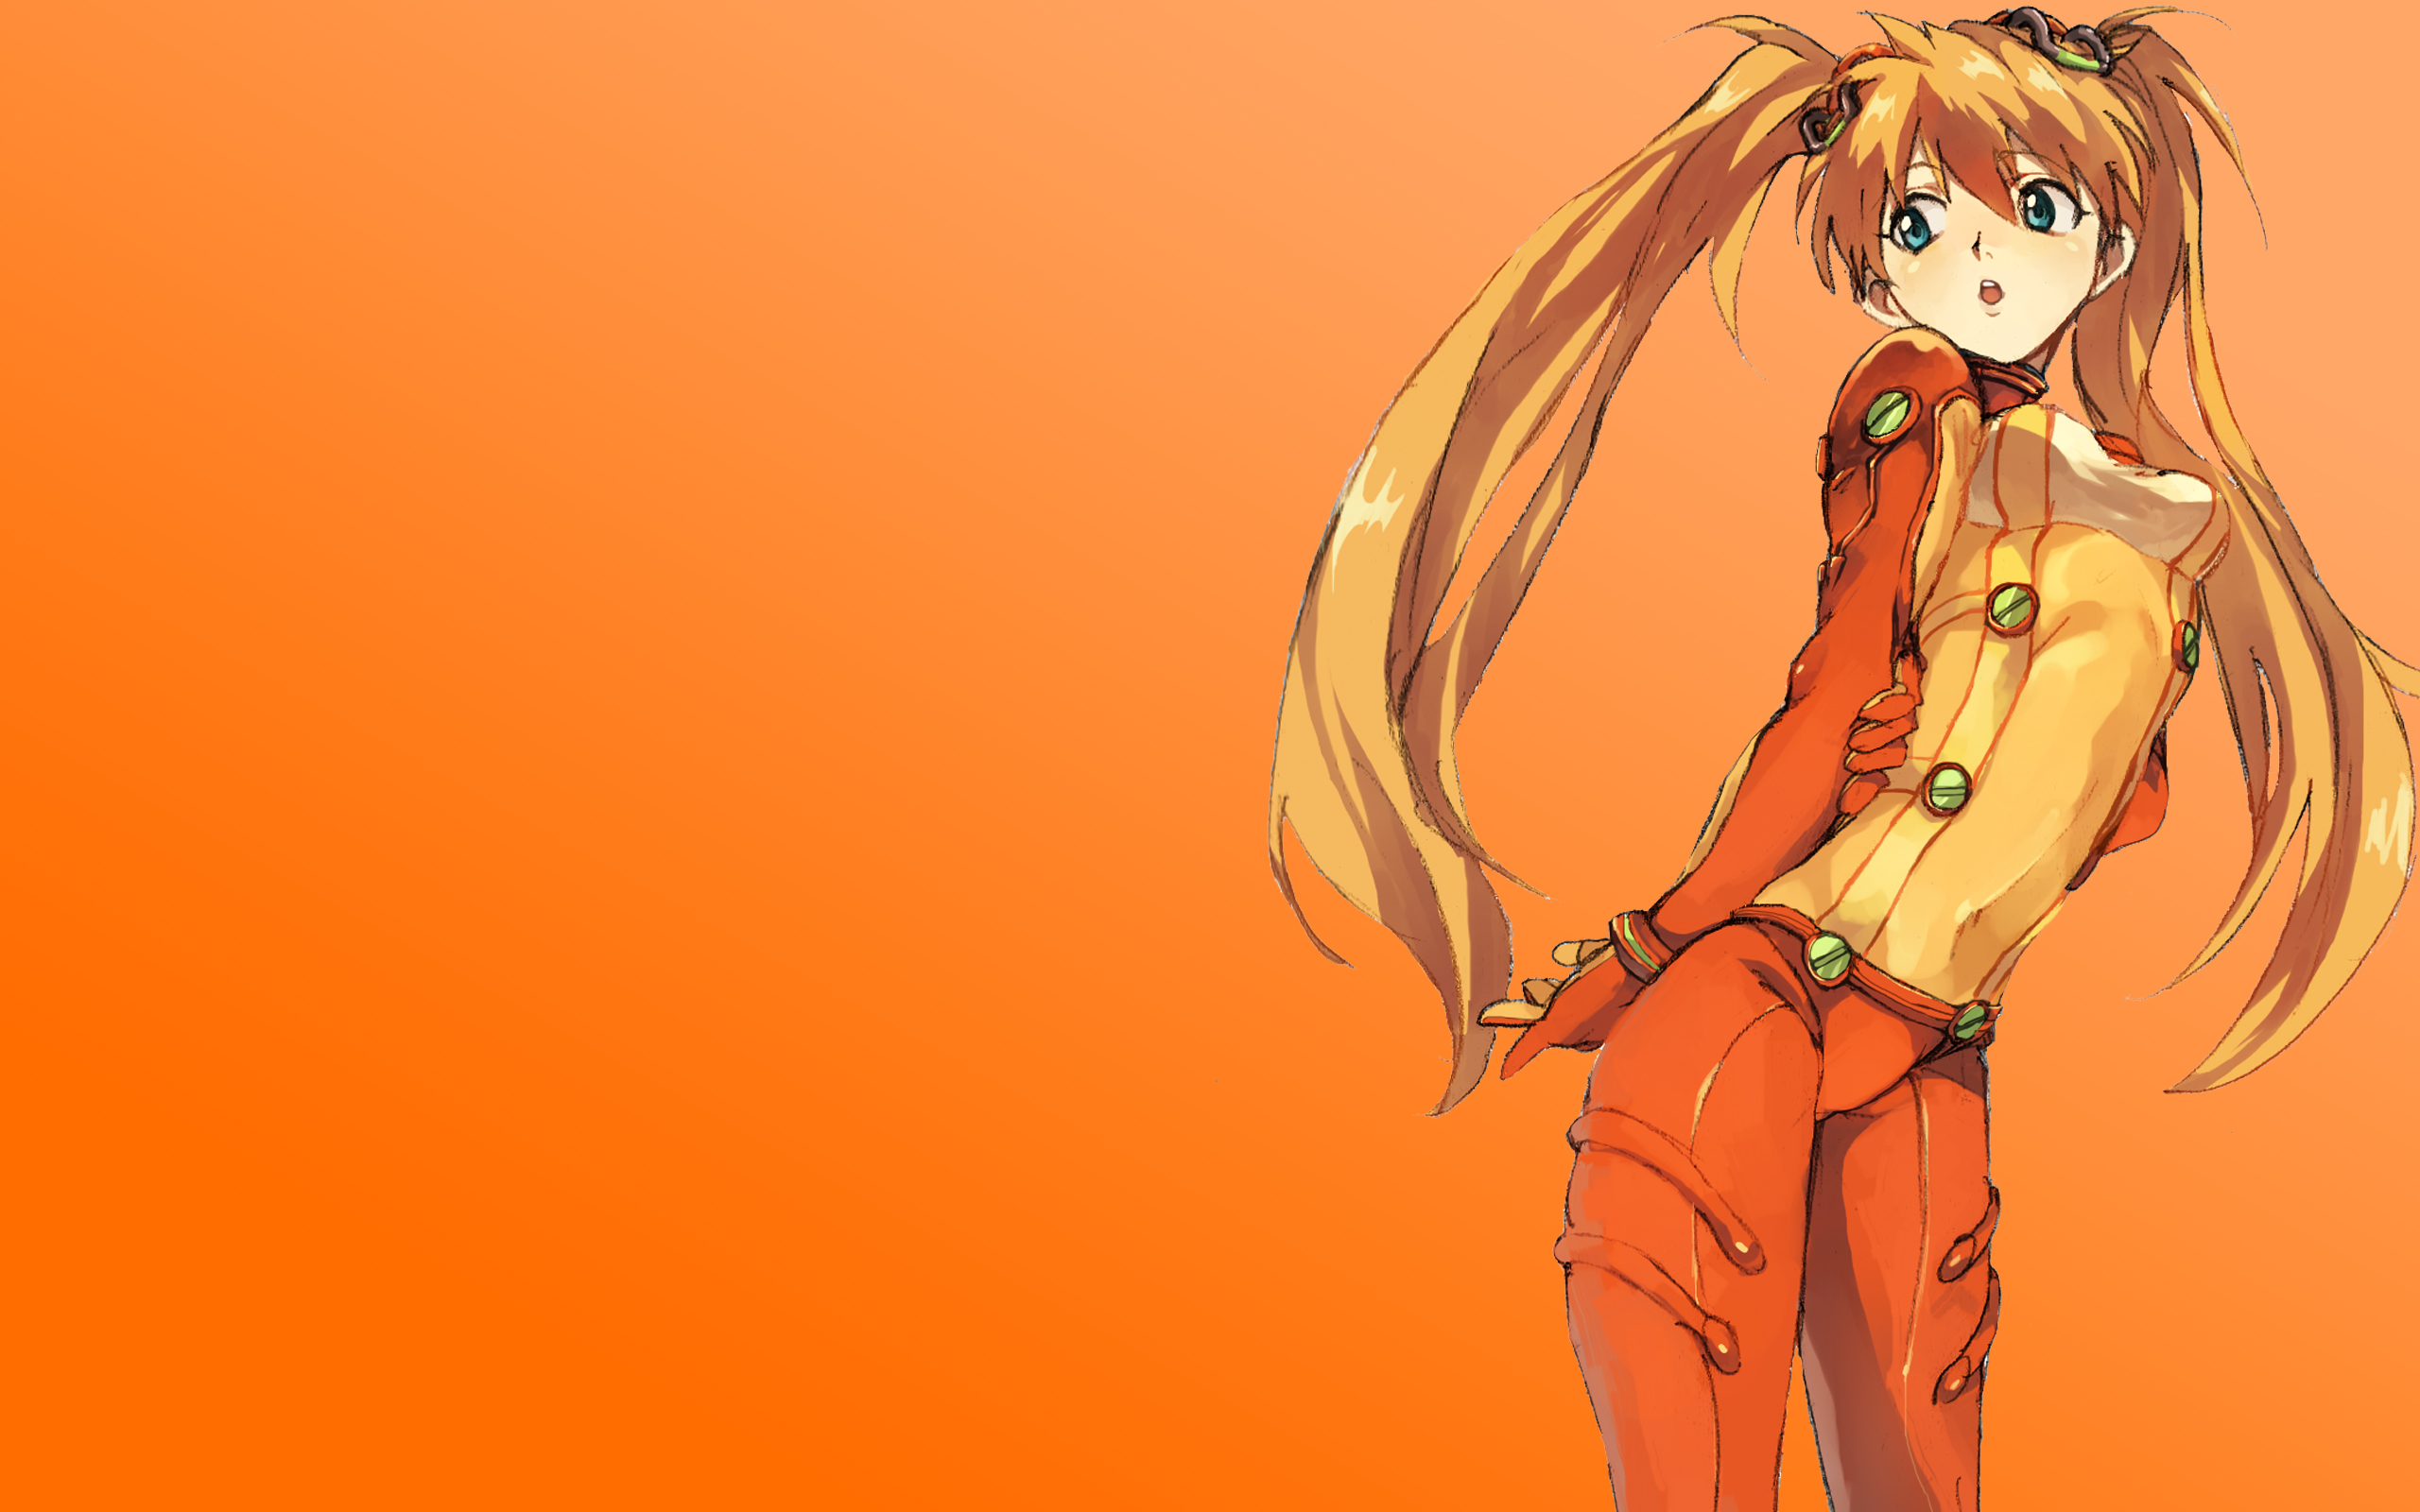  Evangelion 2 0  You Can Not Advance HD Wallpaper 